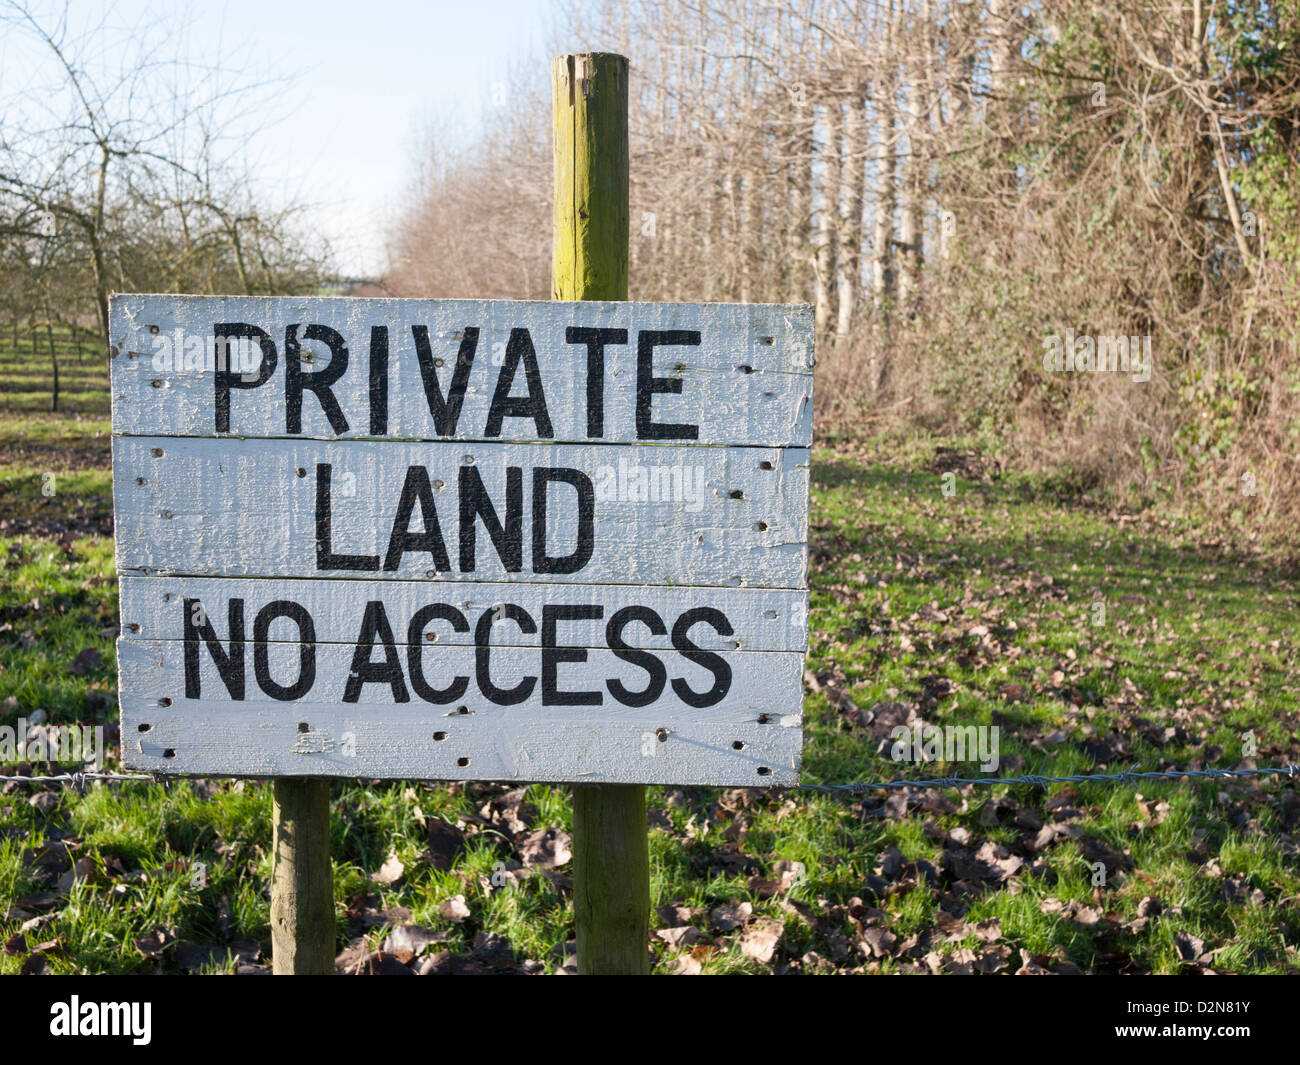 Private Land no access sign in an orchard in the UK Stock Photo